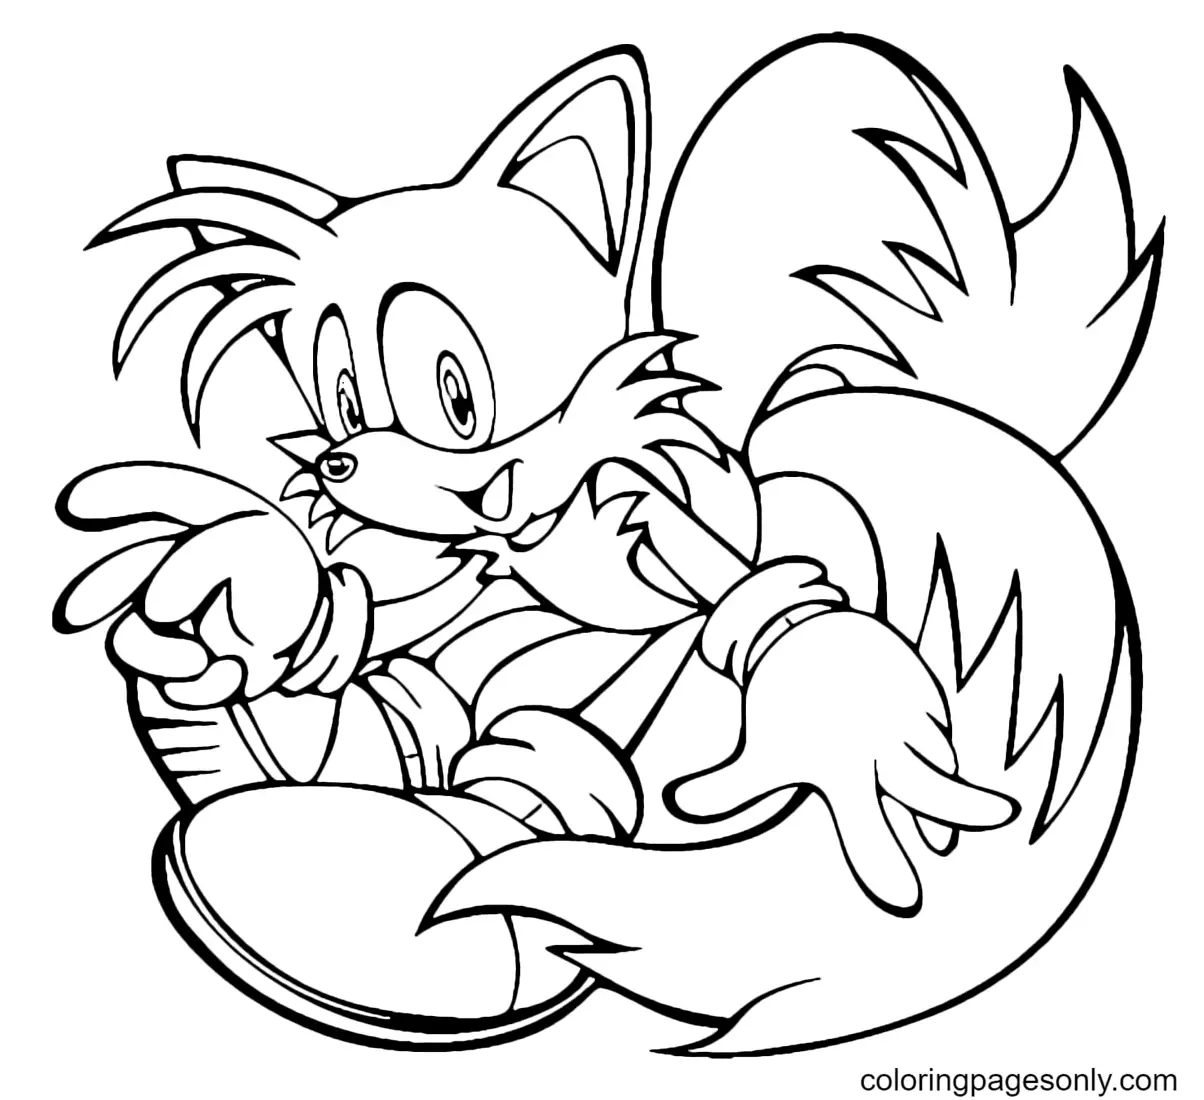 Sparkling tails coloring book